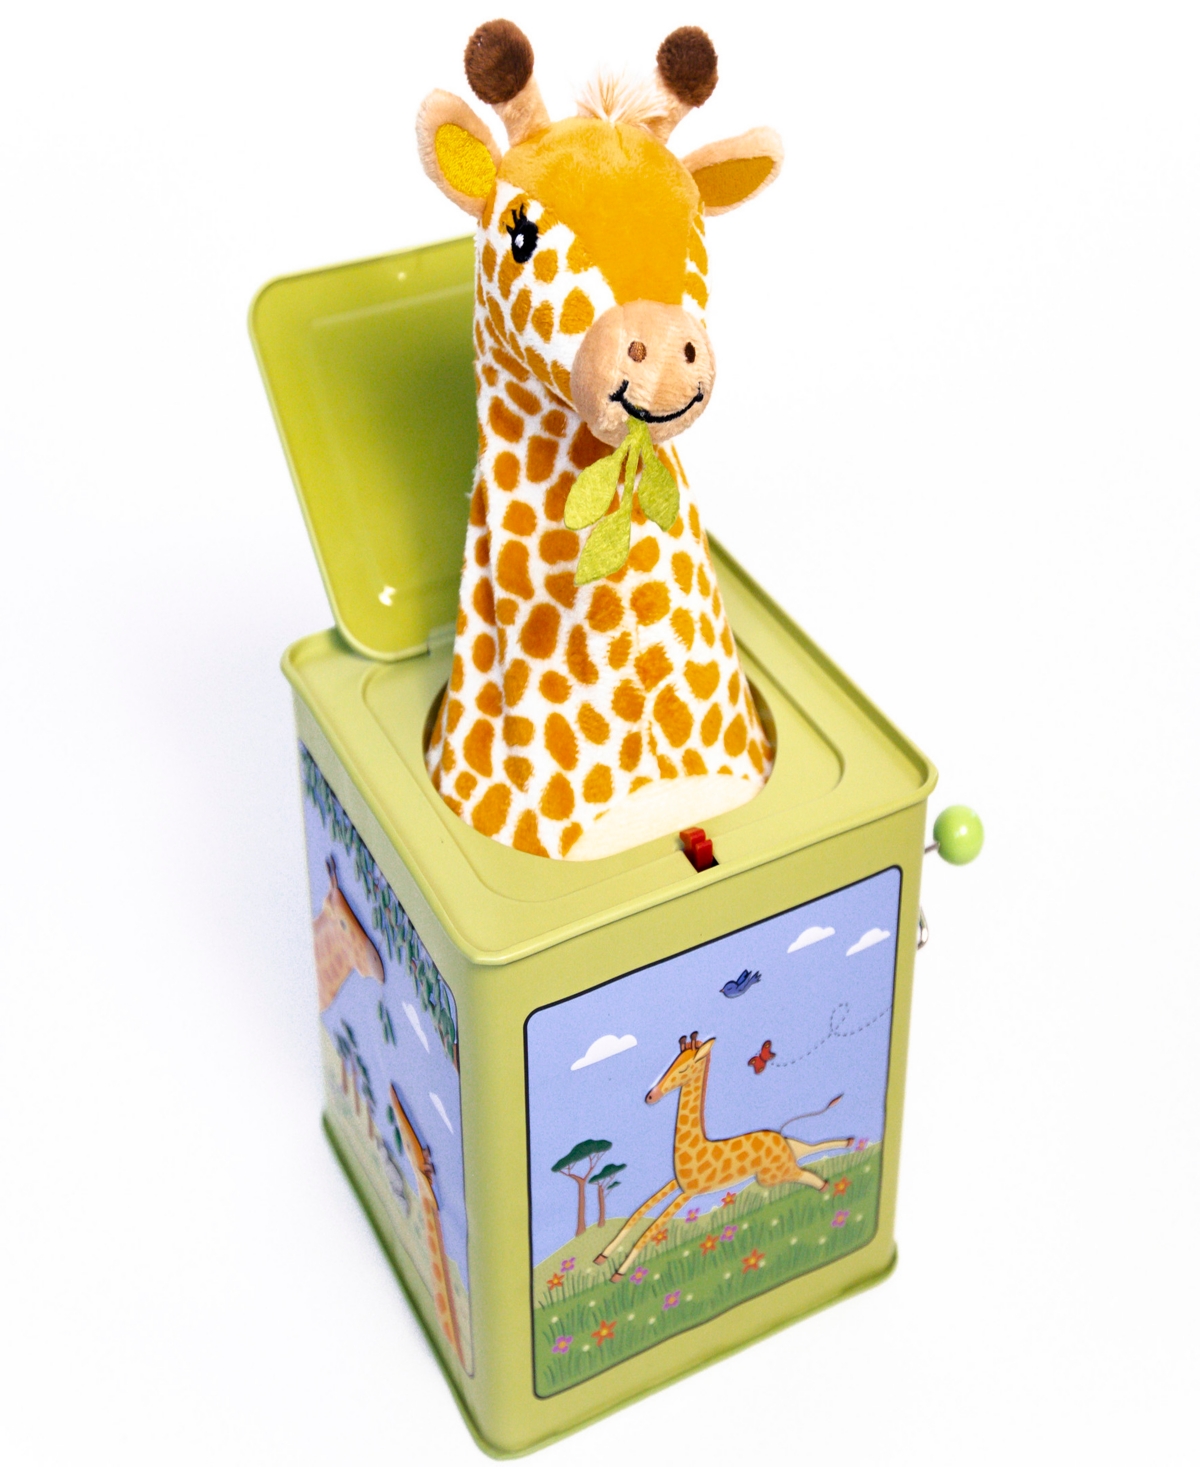 Jack Rabbit Creations Babies' Vintage-like Tin Toy Giraffe Jack In The Box  In Multi